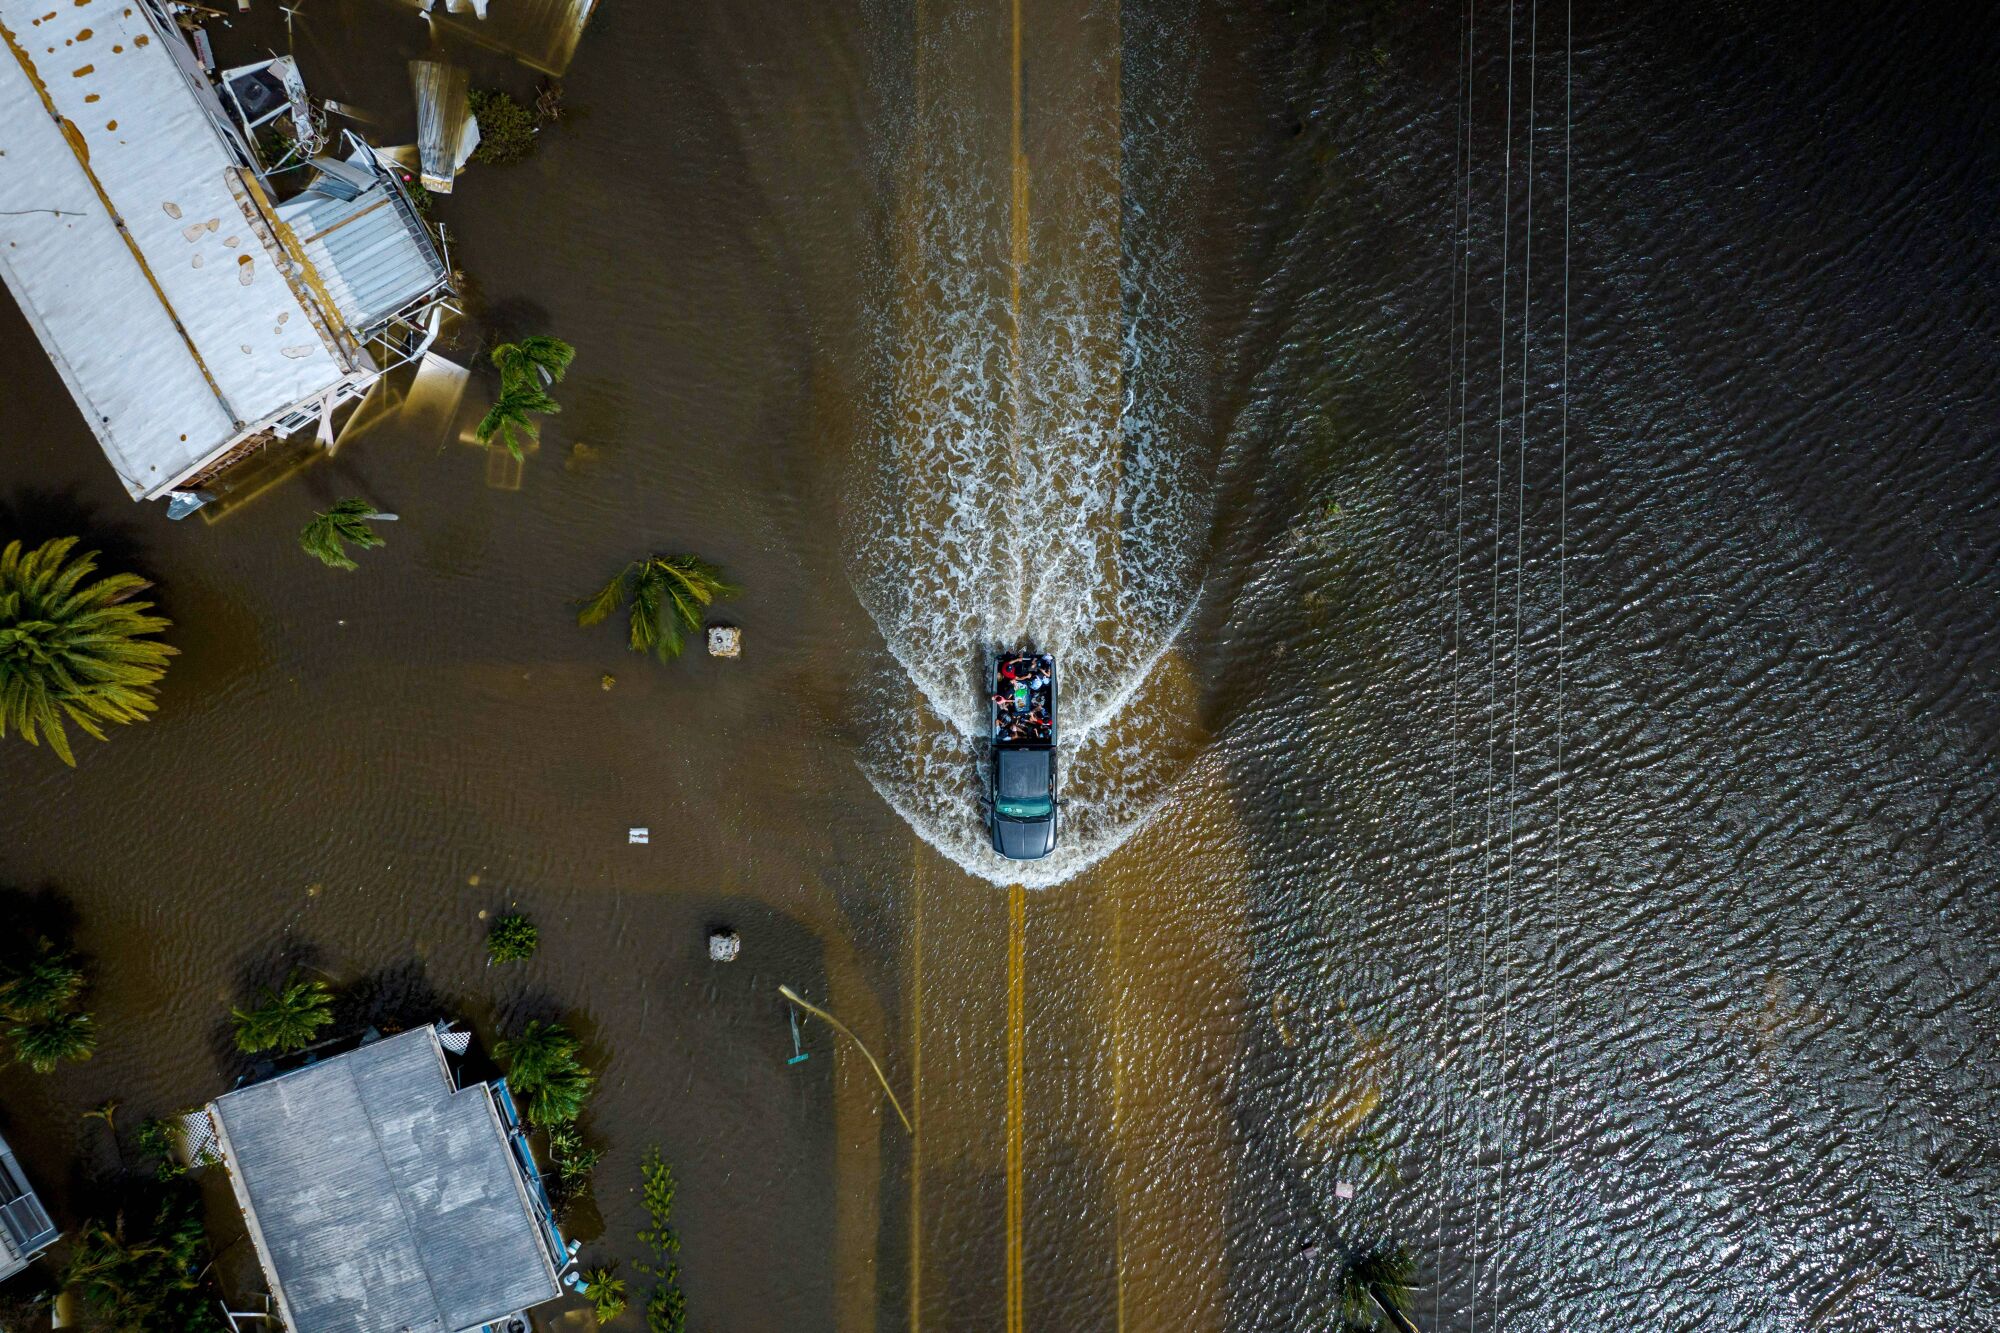 A car drives through a flooded neighborhood in the aftermath of Hurricane Ian in Fort Myers, Fla.